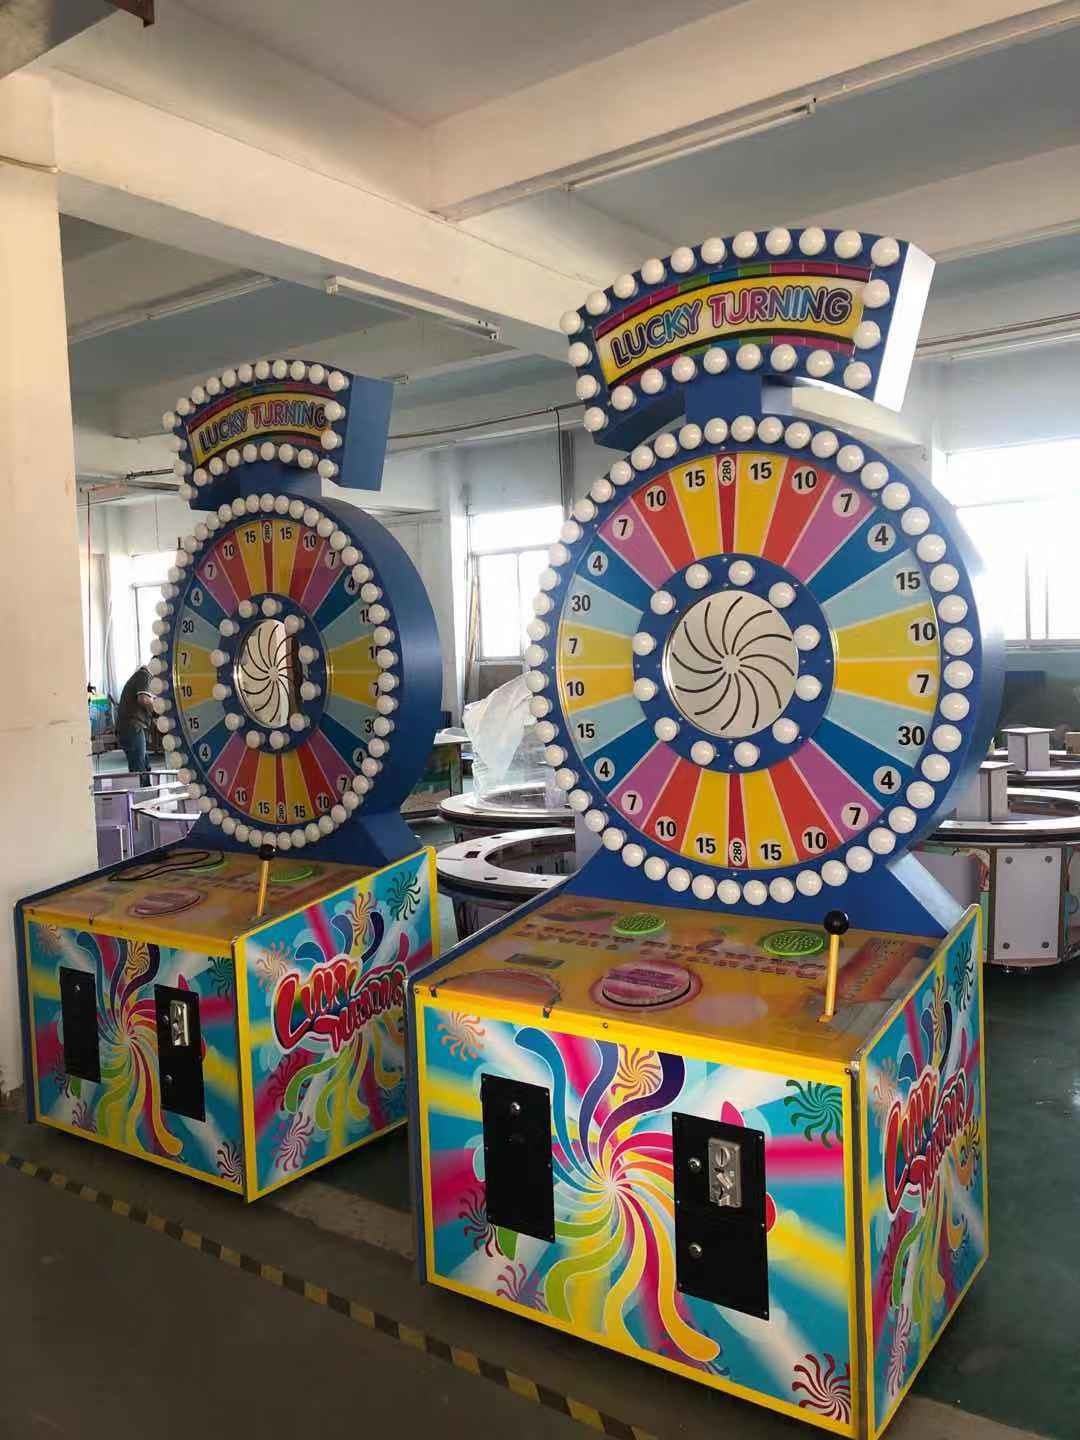 Cheap Lucky Turning Coin Operated Arcade Machines Attractive high incomes and popular for sale